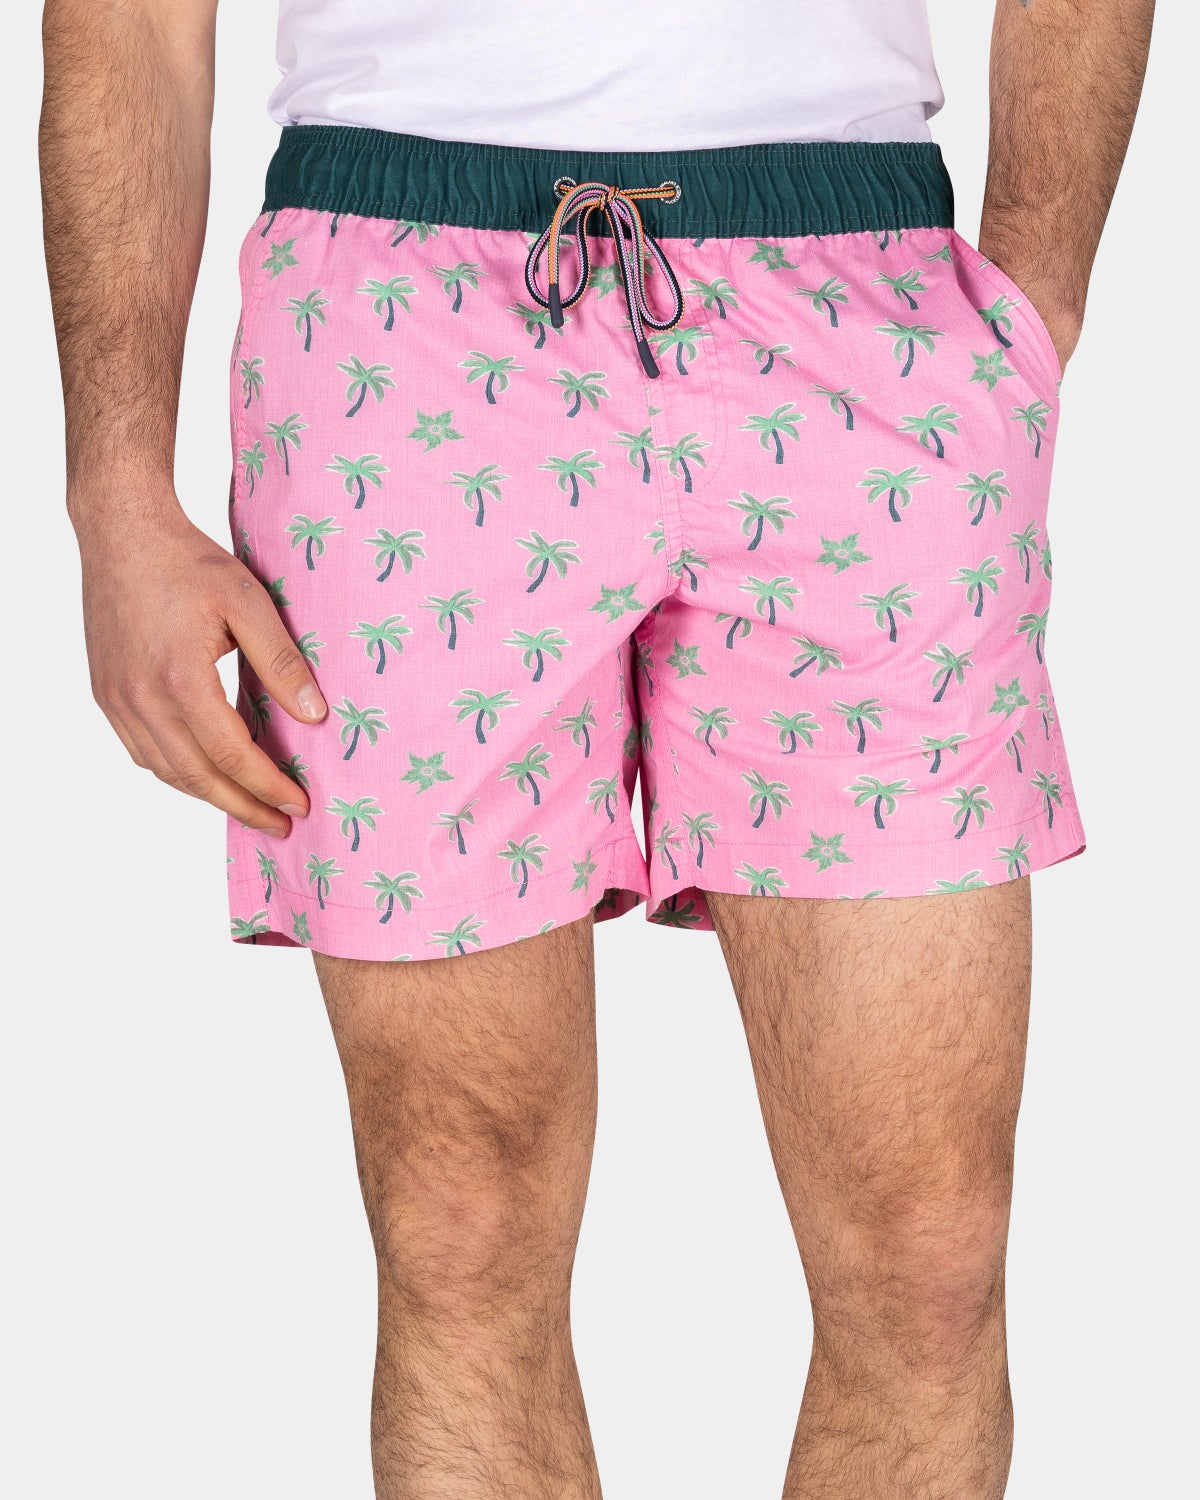 Swimming trunks with palm trees - Bright Pink